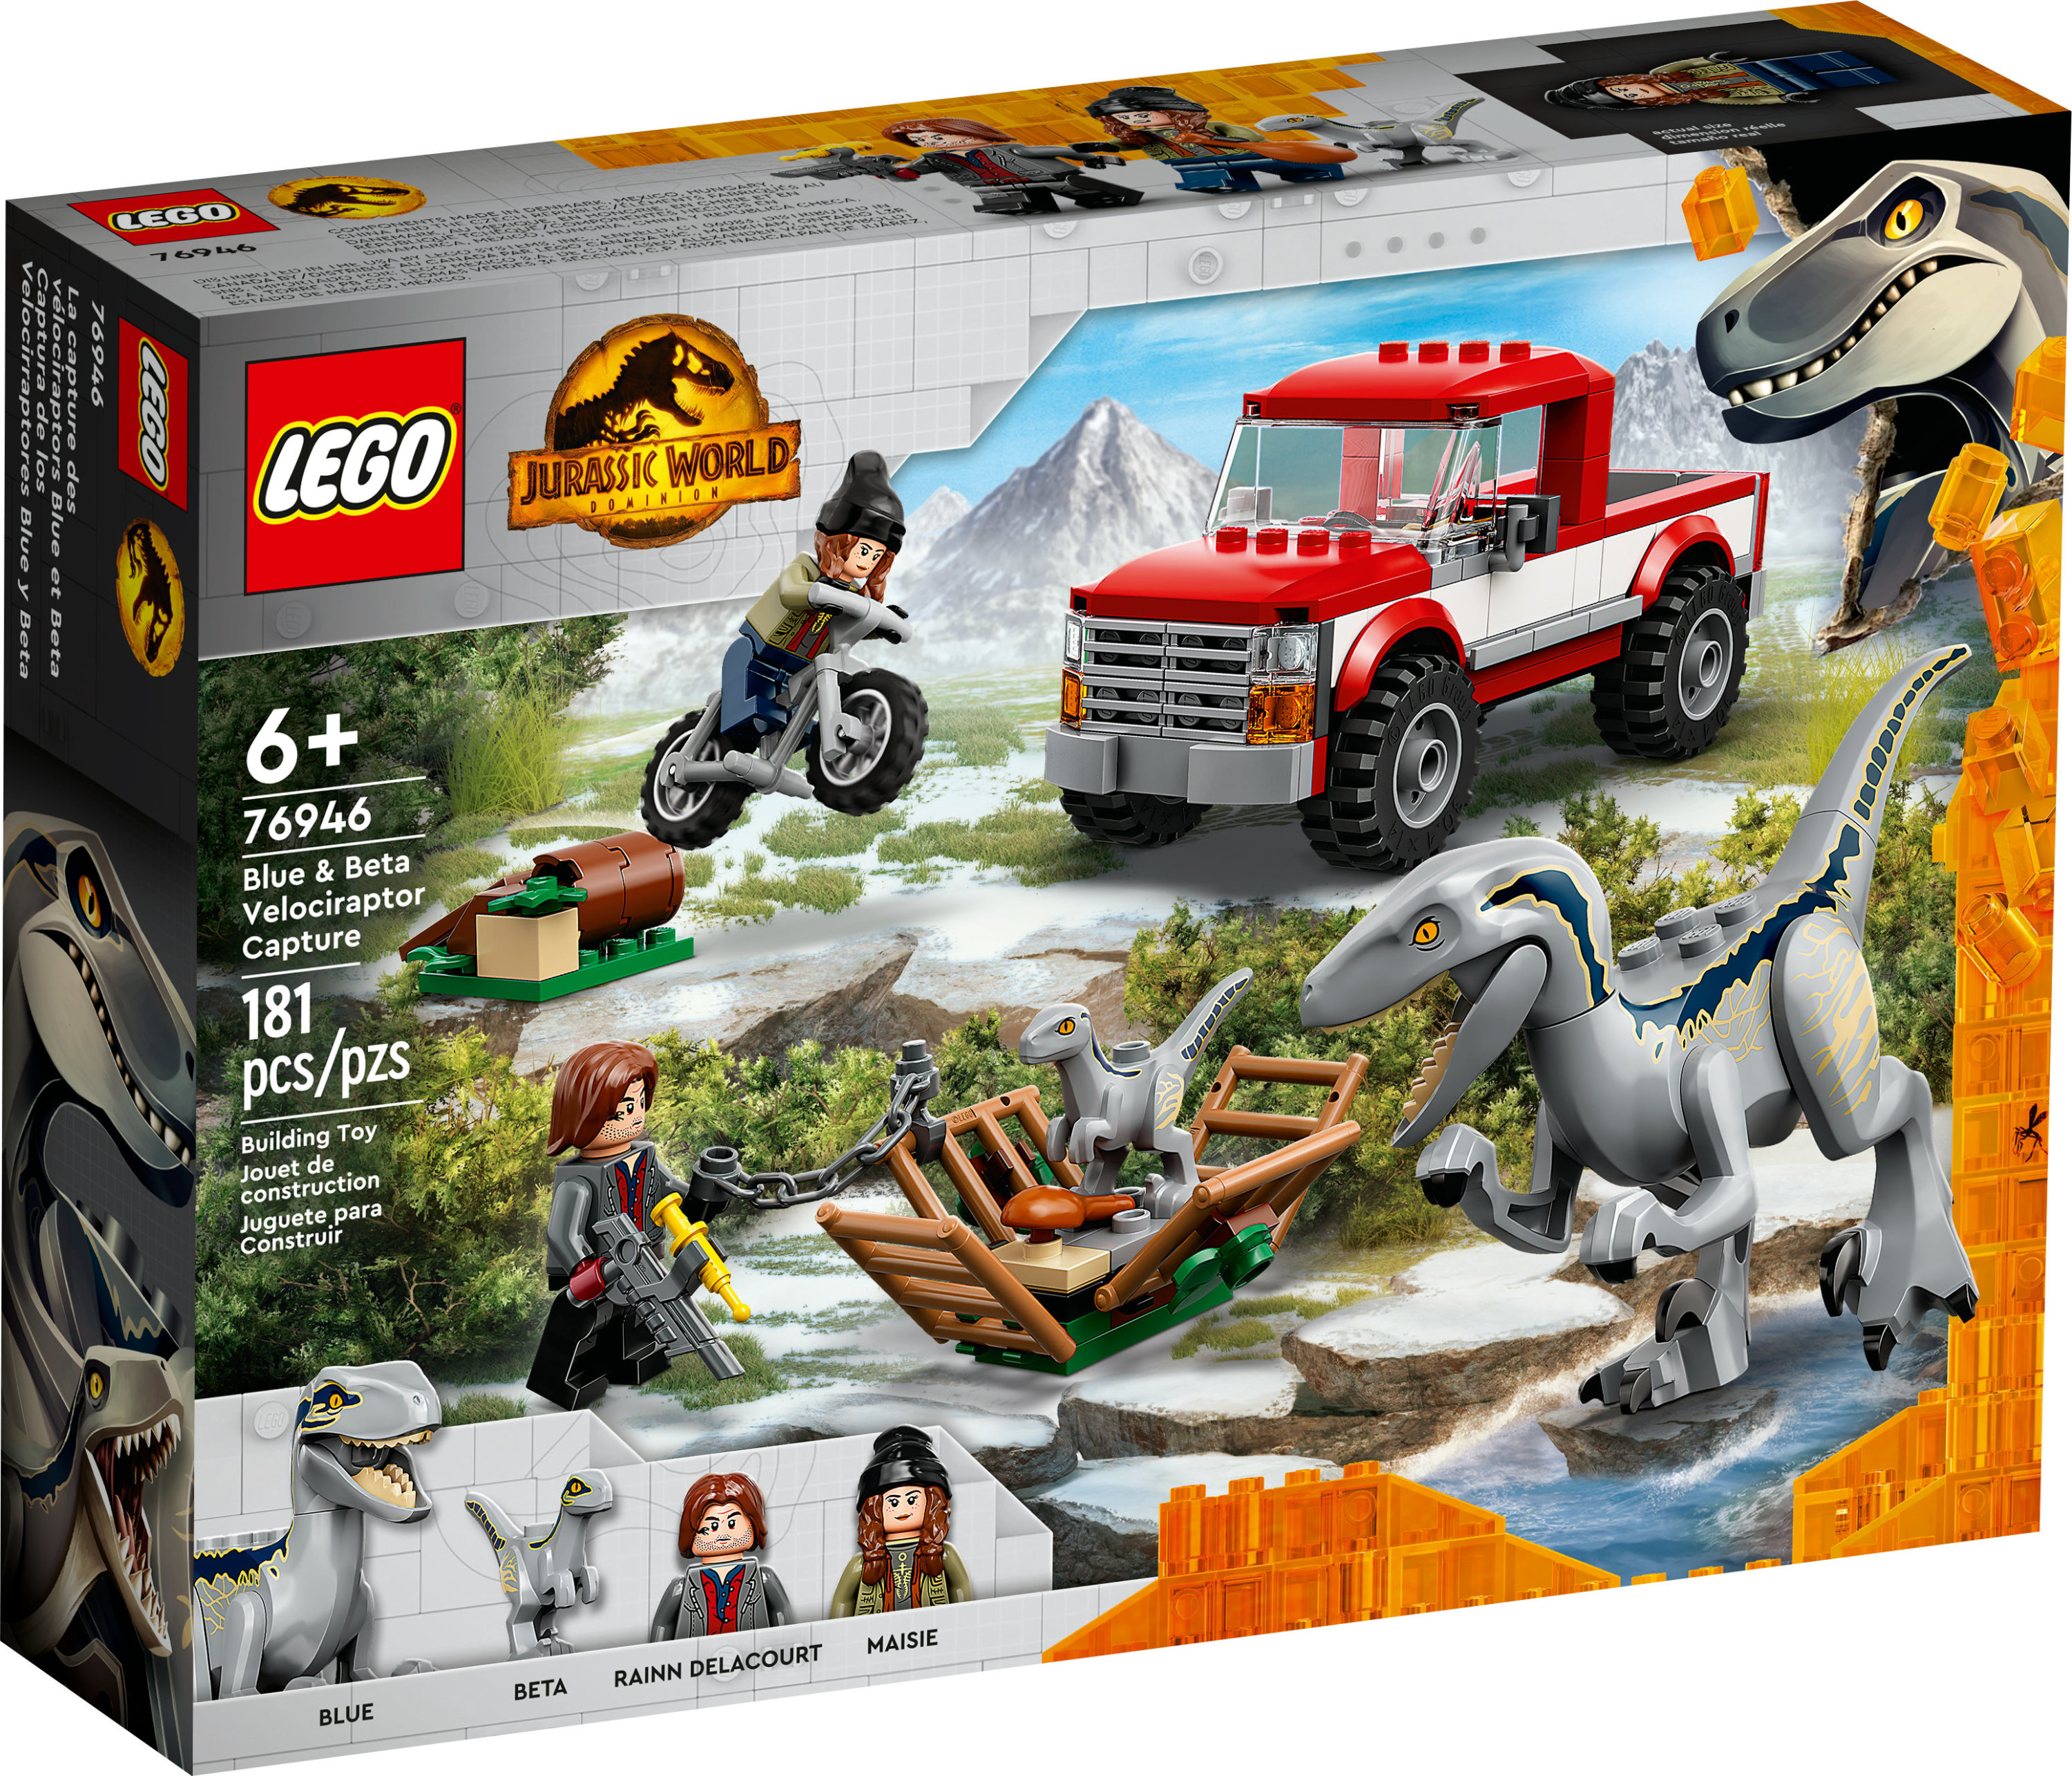 LEGO Jurassic World Blue and Beta Velociraptor Capture 76946 with Truck and 2 Dinosaur Toys for Kids, 2022 Dominion Movie Inspired Set - image 5 of 8